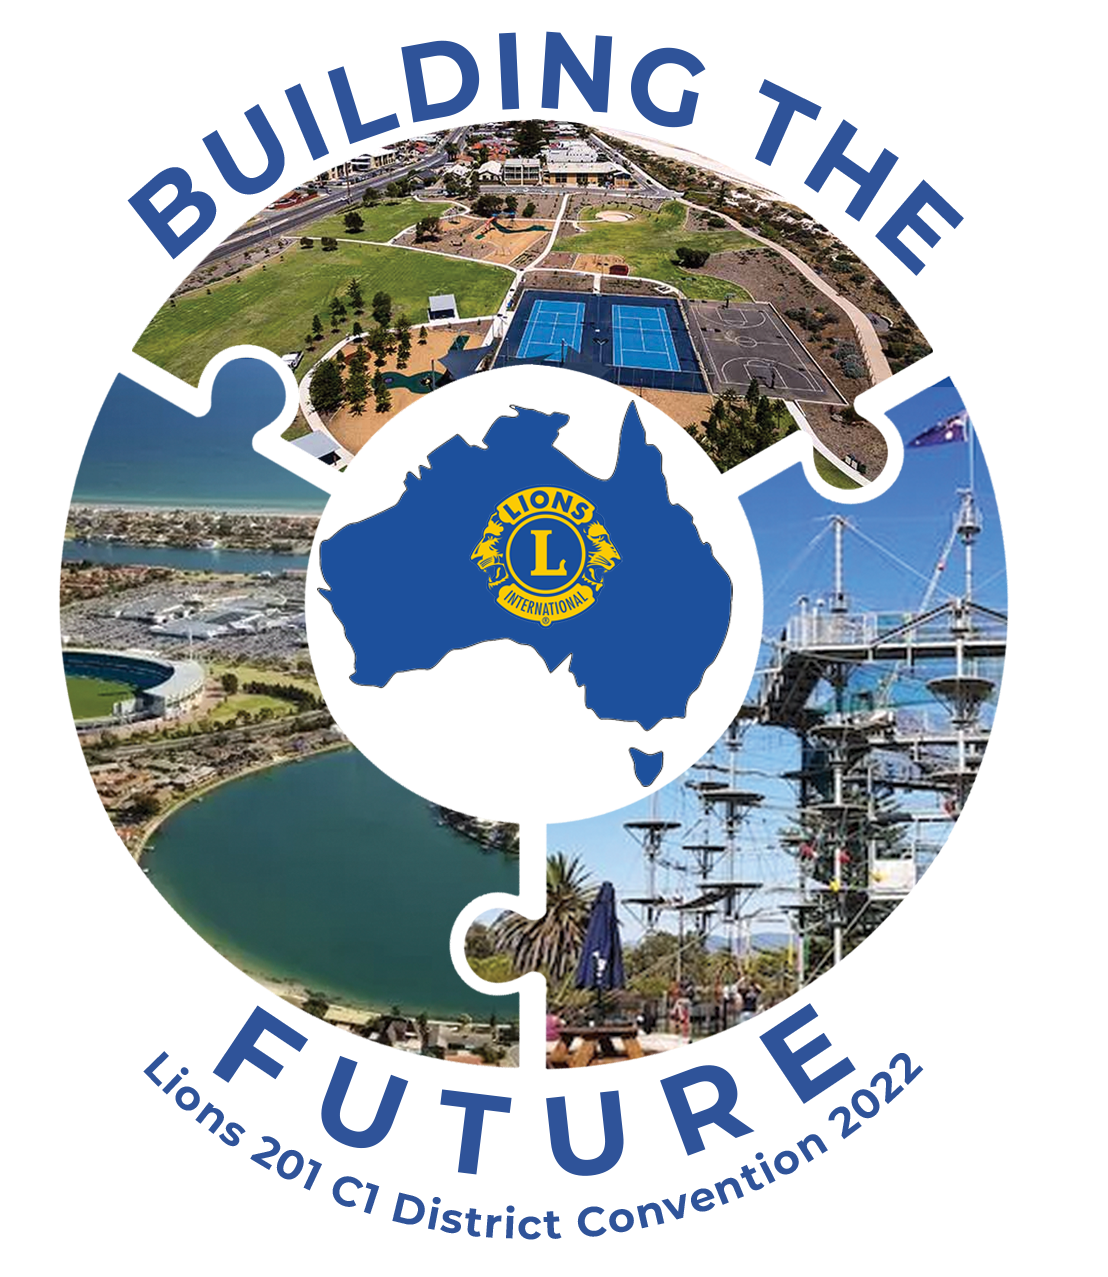 Building the Future logo for conventions